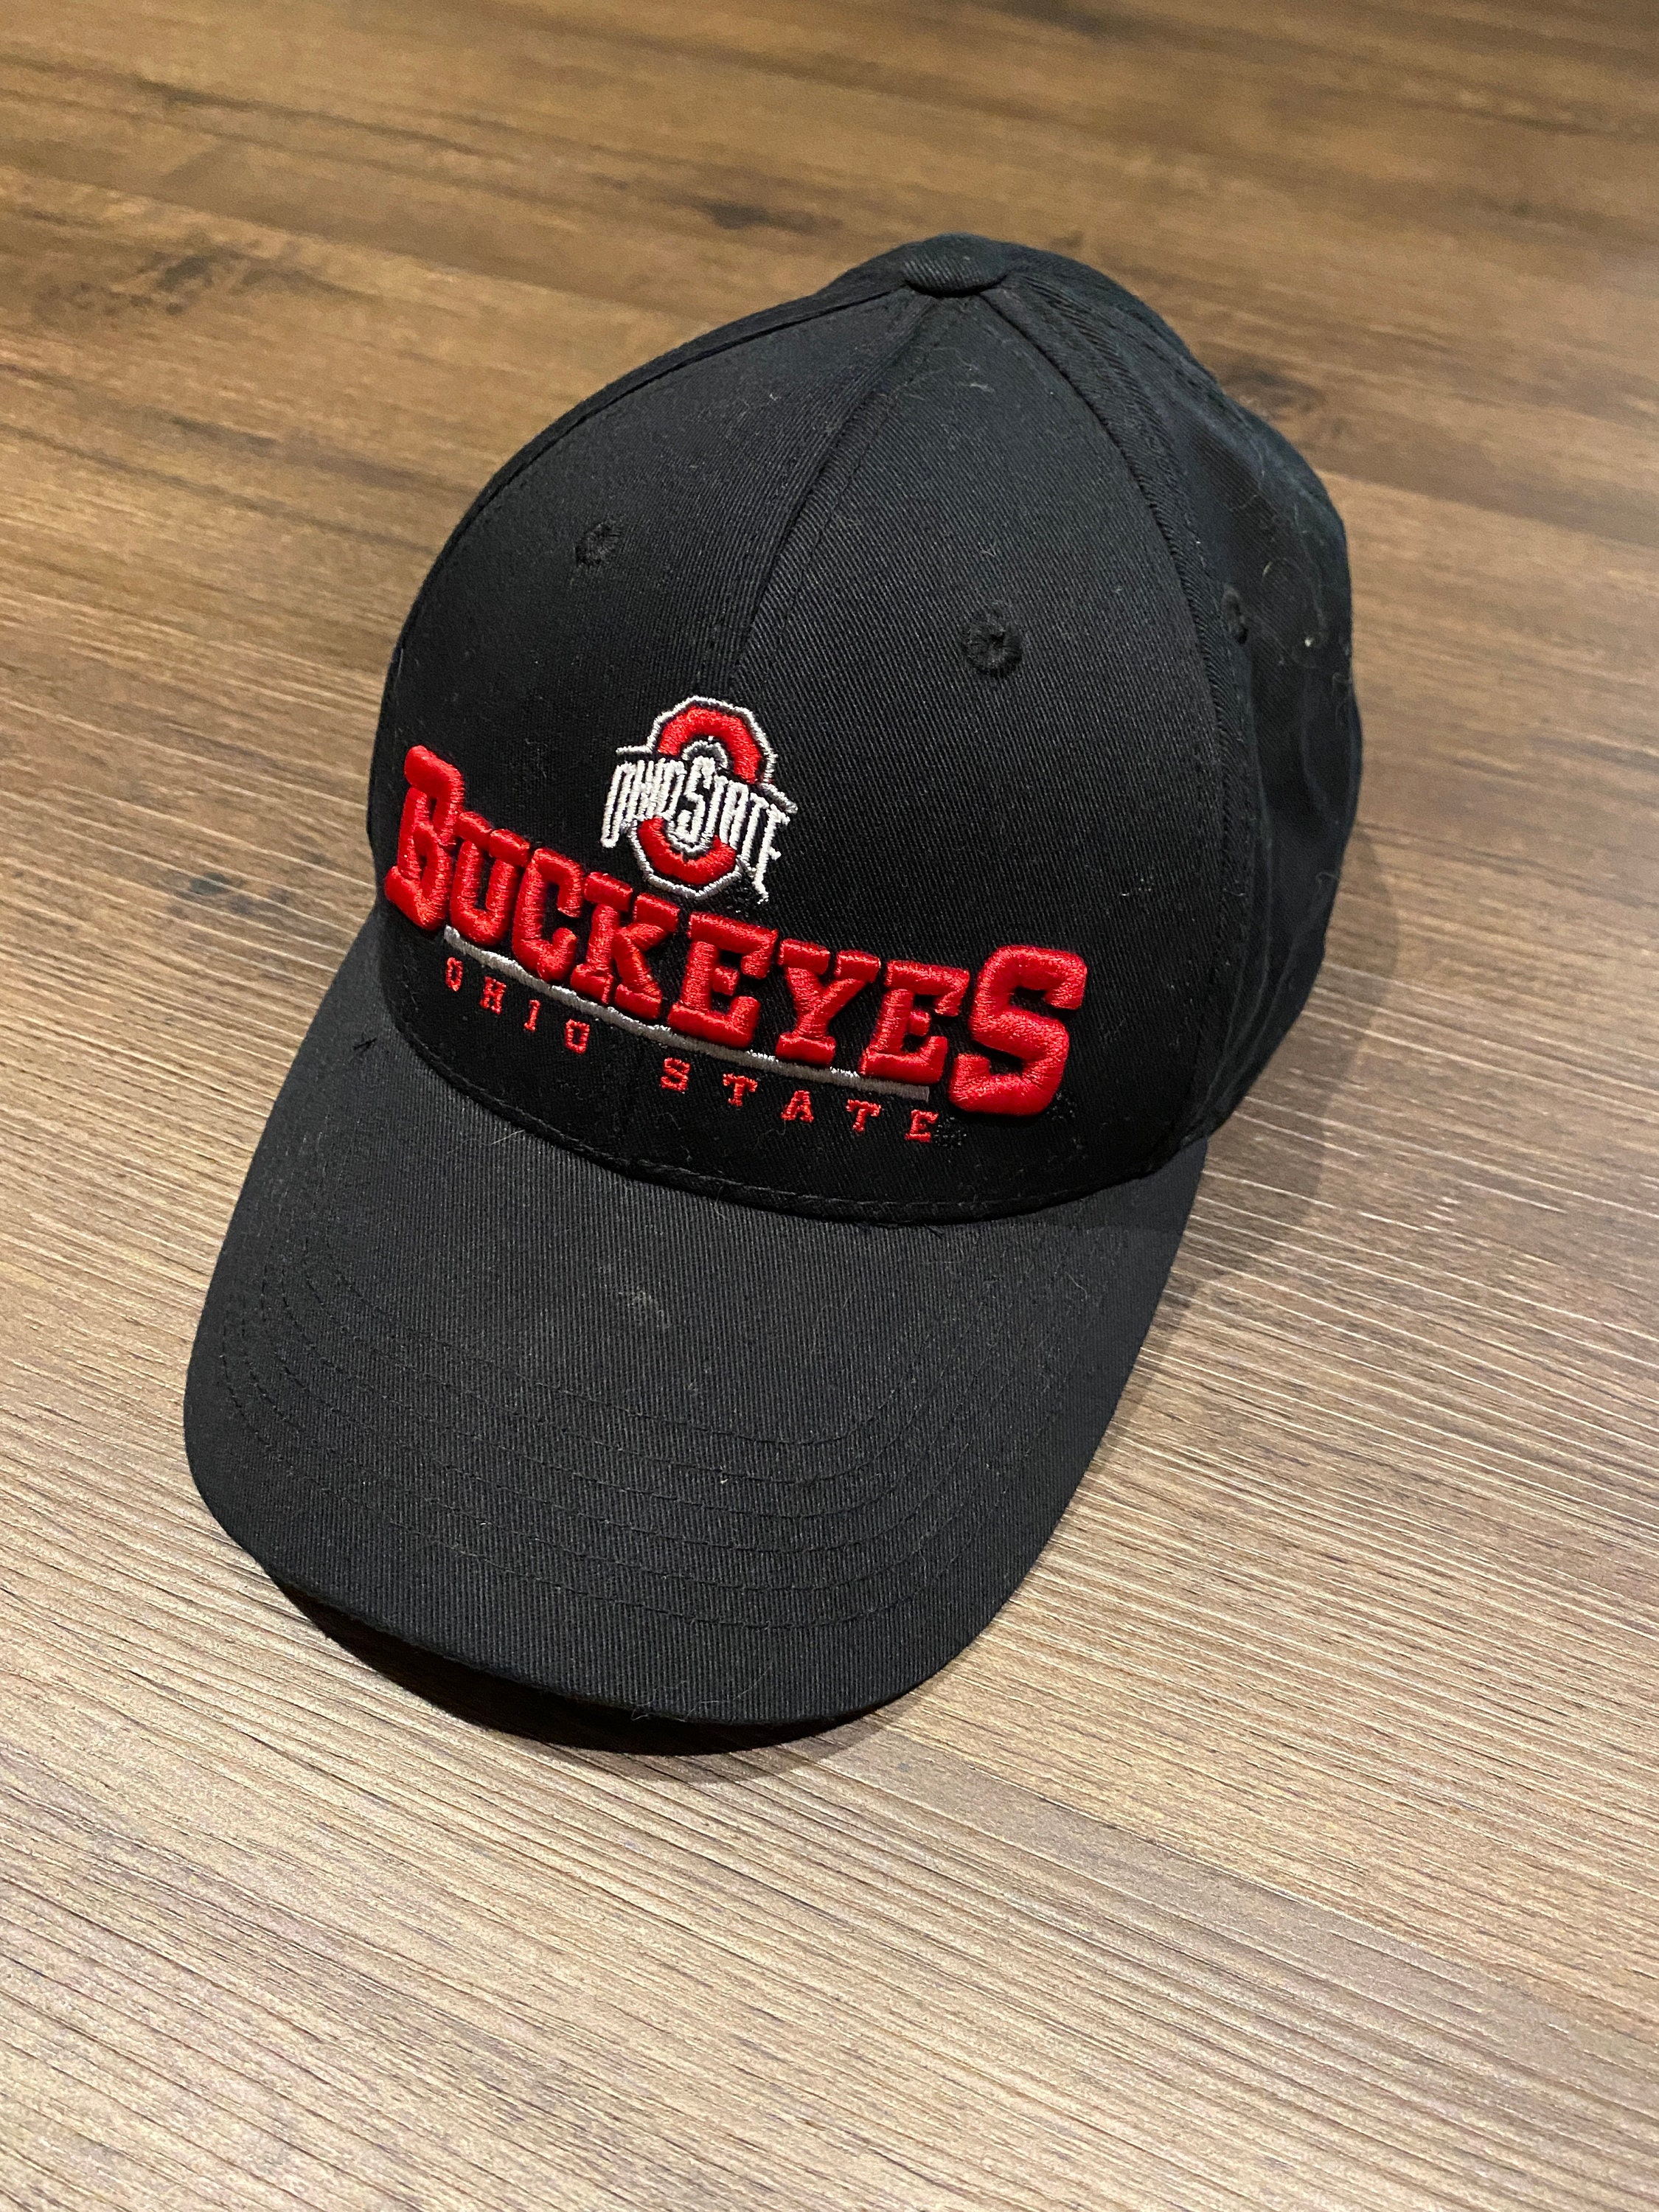 Ohio State Buckeyes Embroidered Hat Adjustable With Snap | Etsy